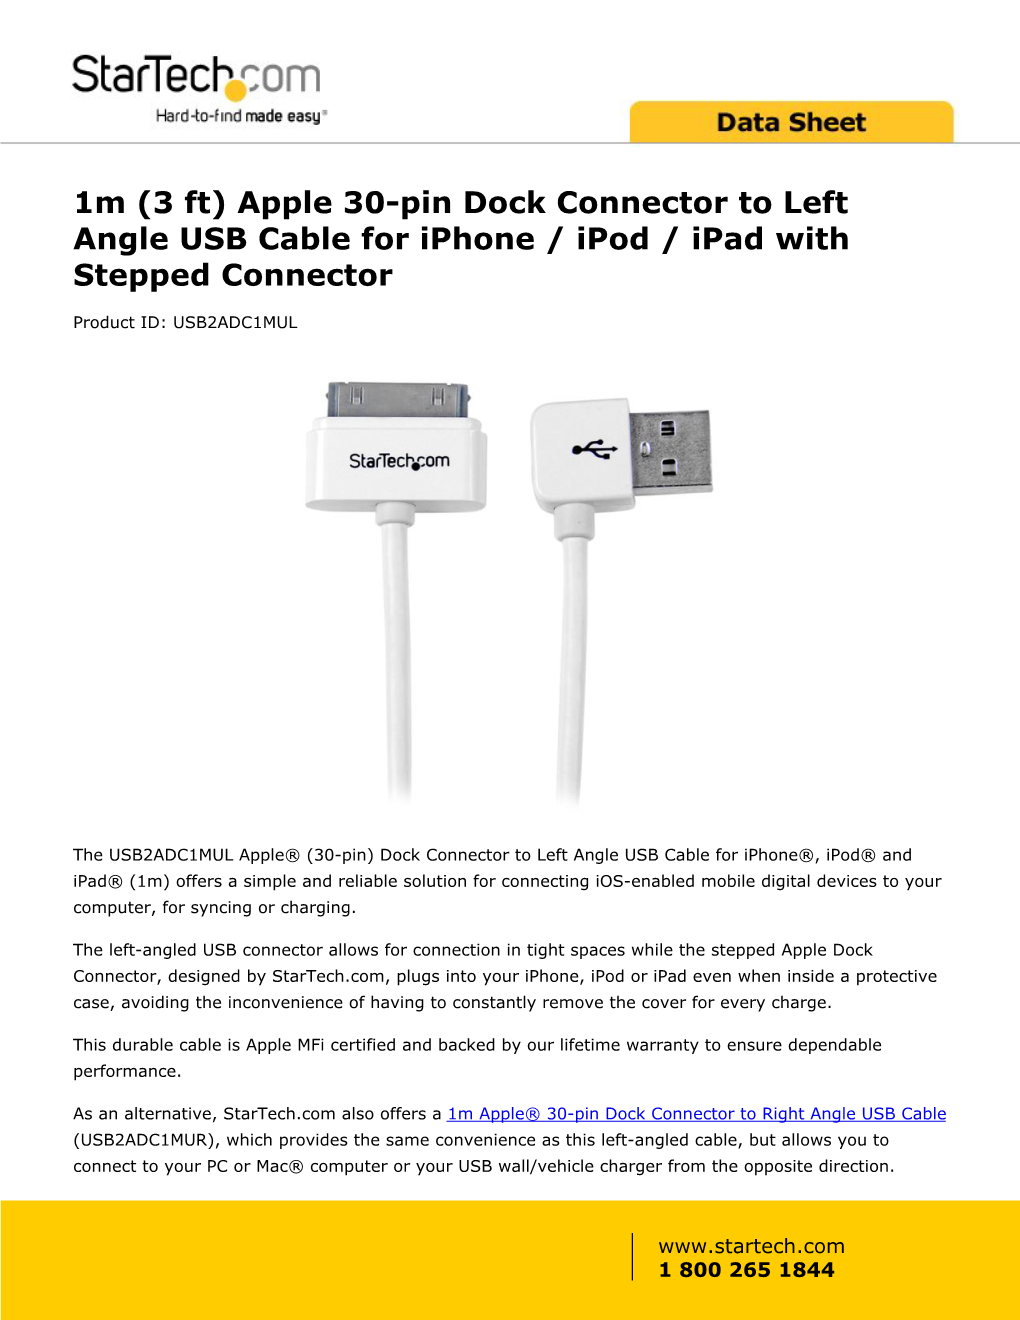 Apple 30-Pin Dock Connector to Left Angle USB Cable for Iphone / Ipod / Ipad with Stepped Connector